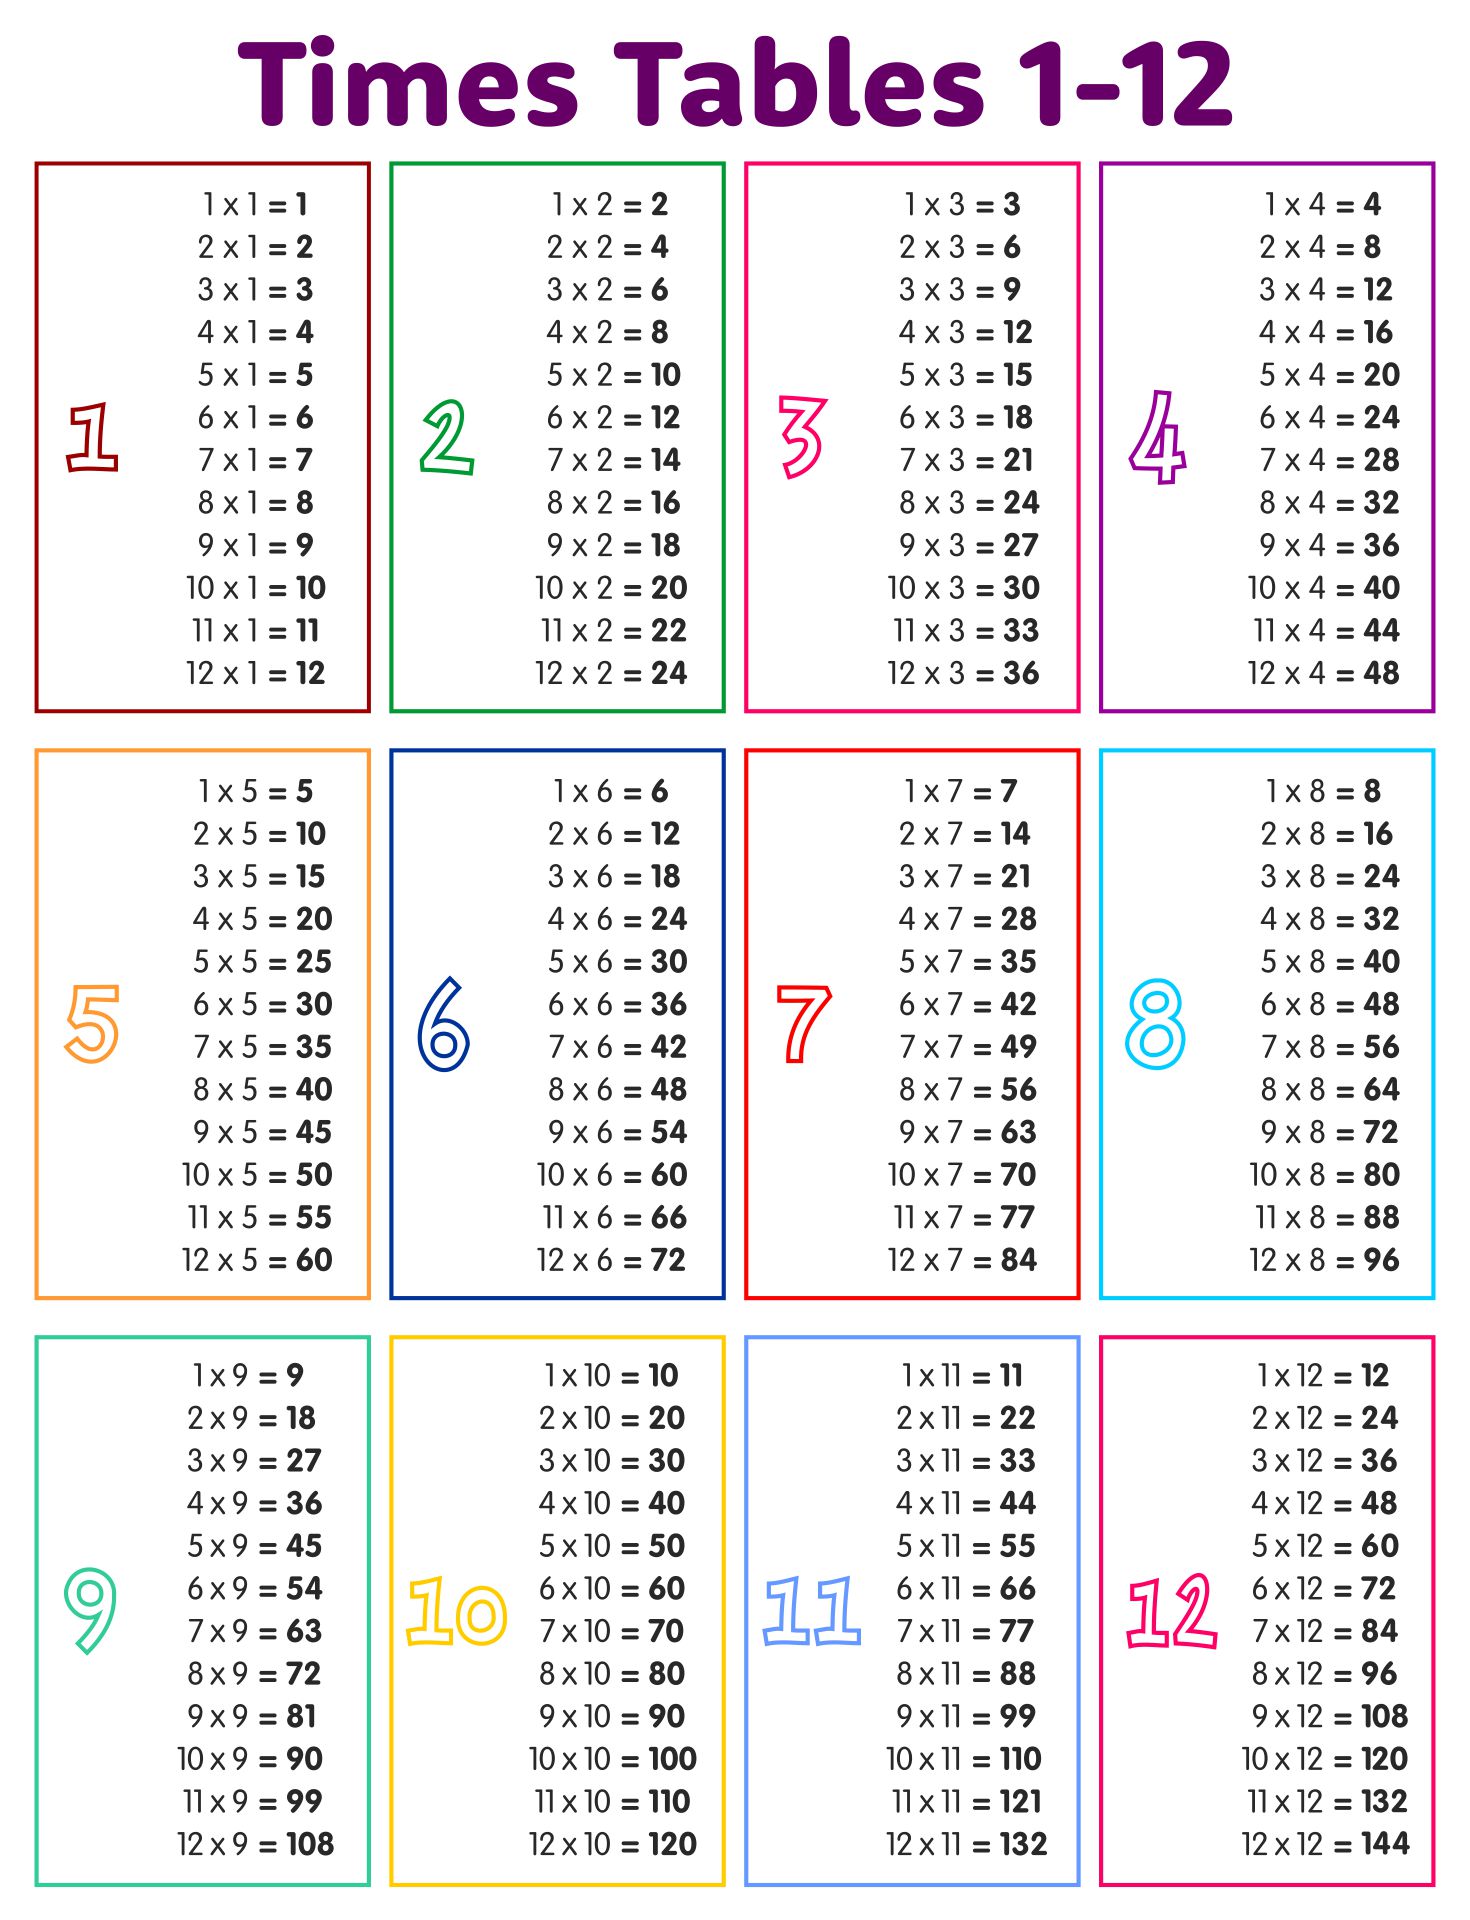 times-tables-chart-2-20-elcho-table